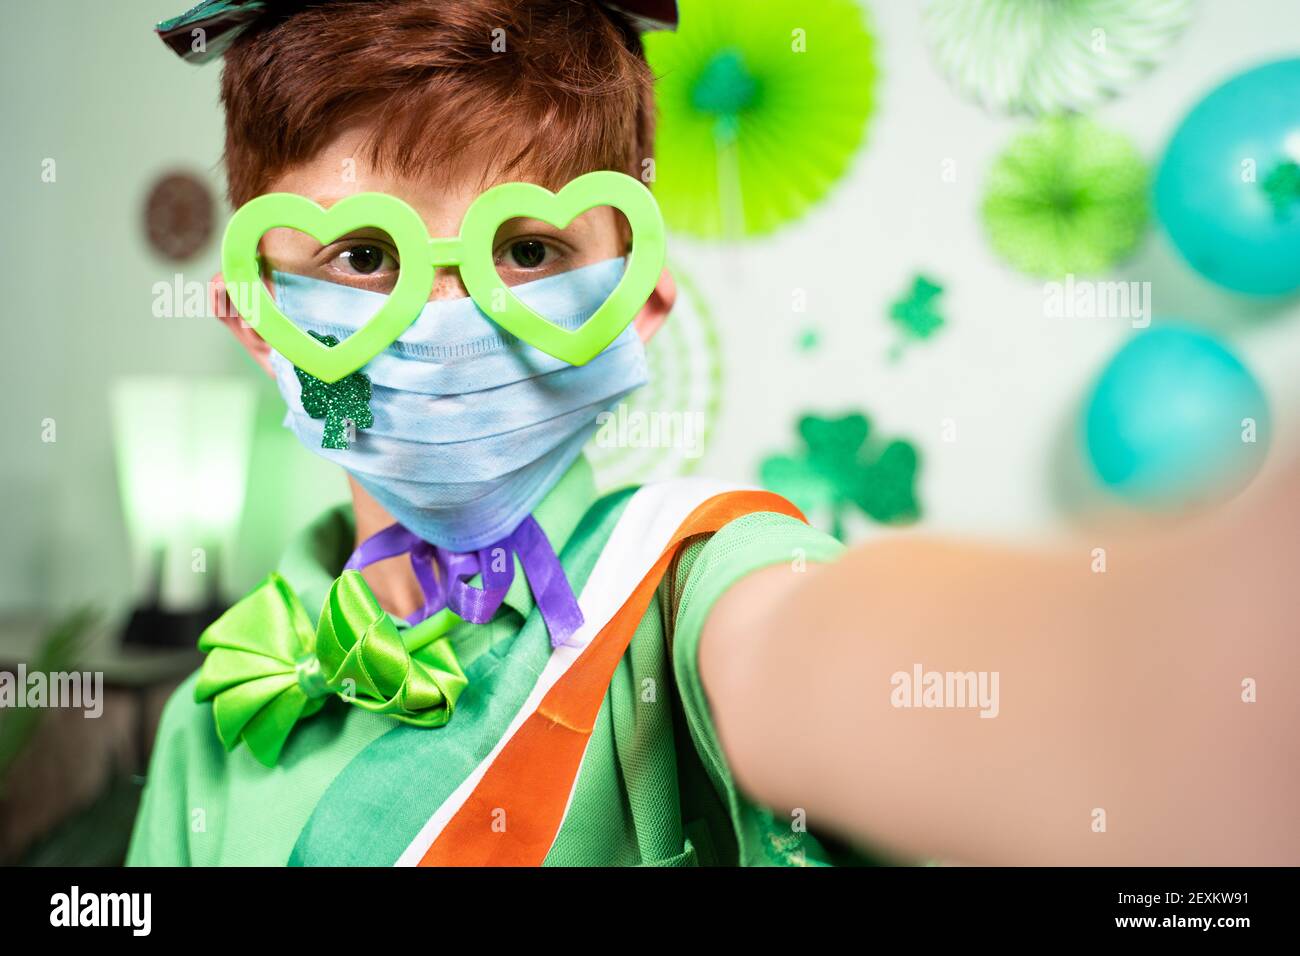 Selective focus on mask, Young kid with medical face mask taking selfie during Saint patricks day celebration at home on decorated background during Stock Photo